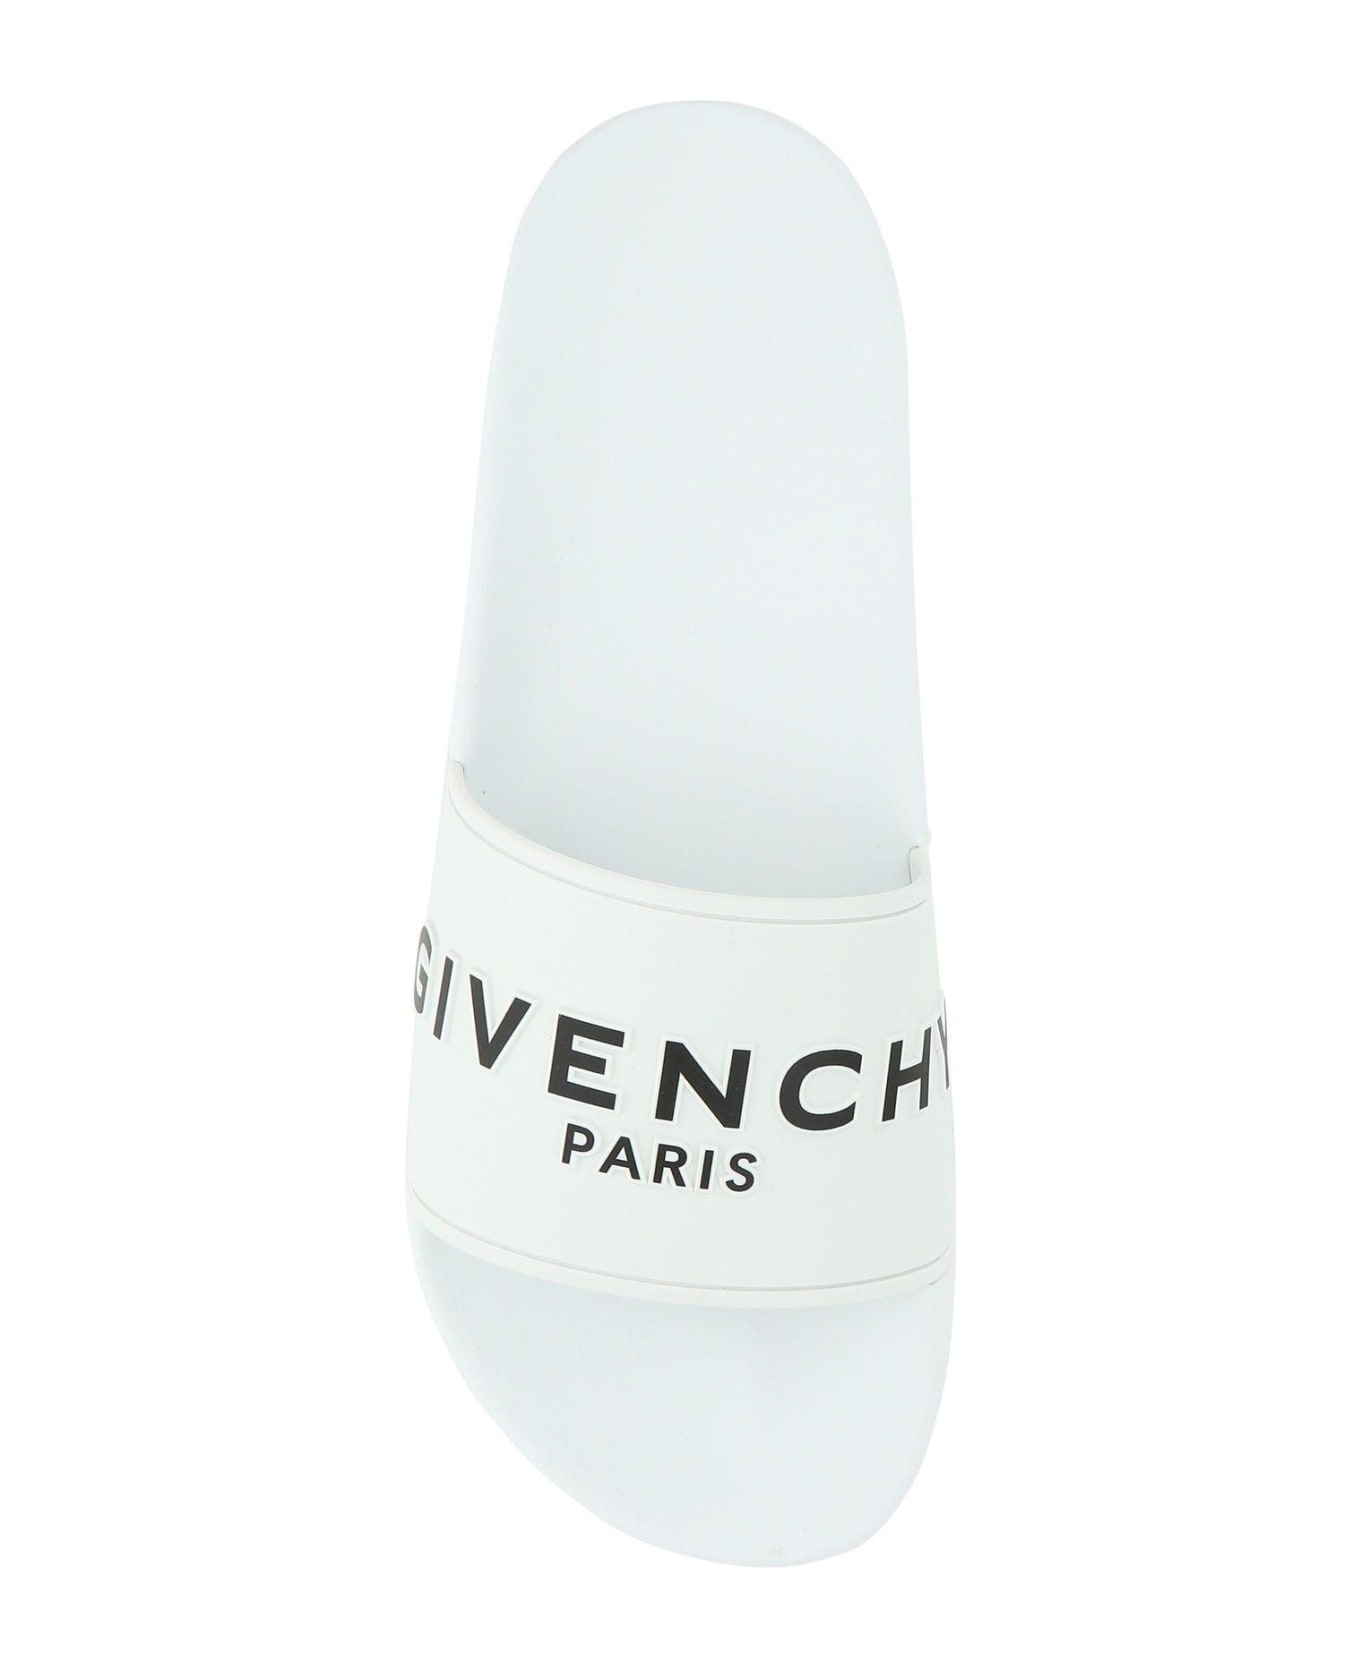 Givenchy White Rubber Slippers - WHITE その他各種シューズ